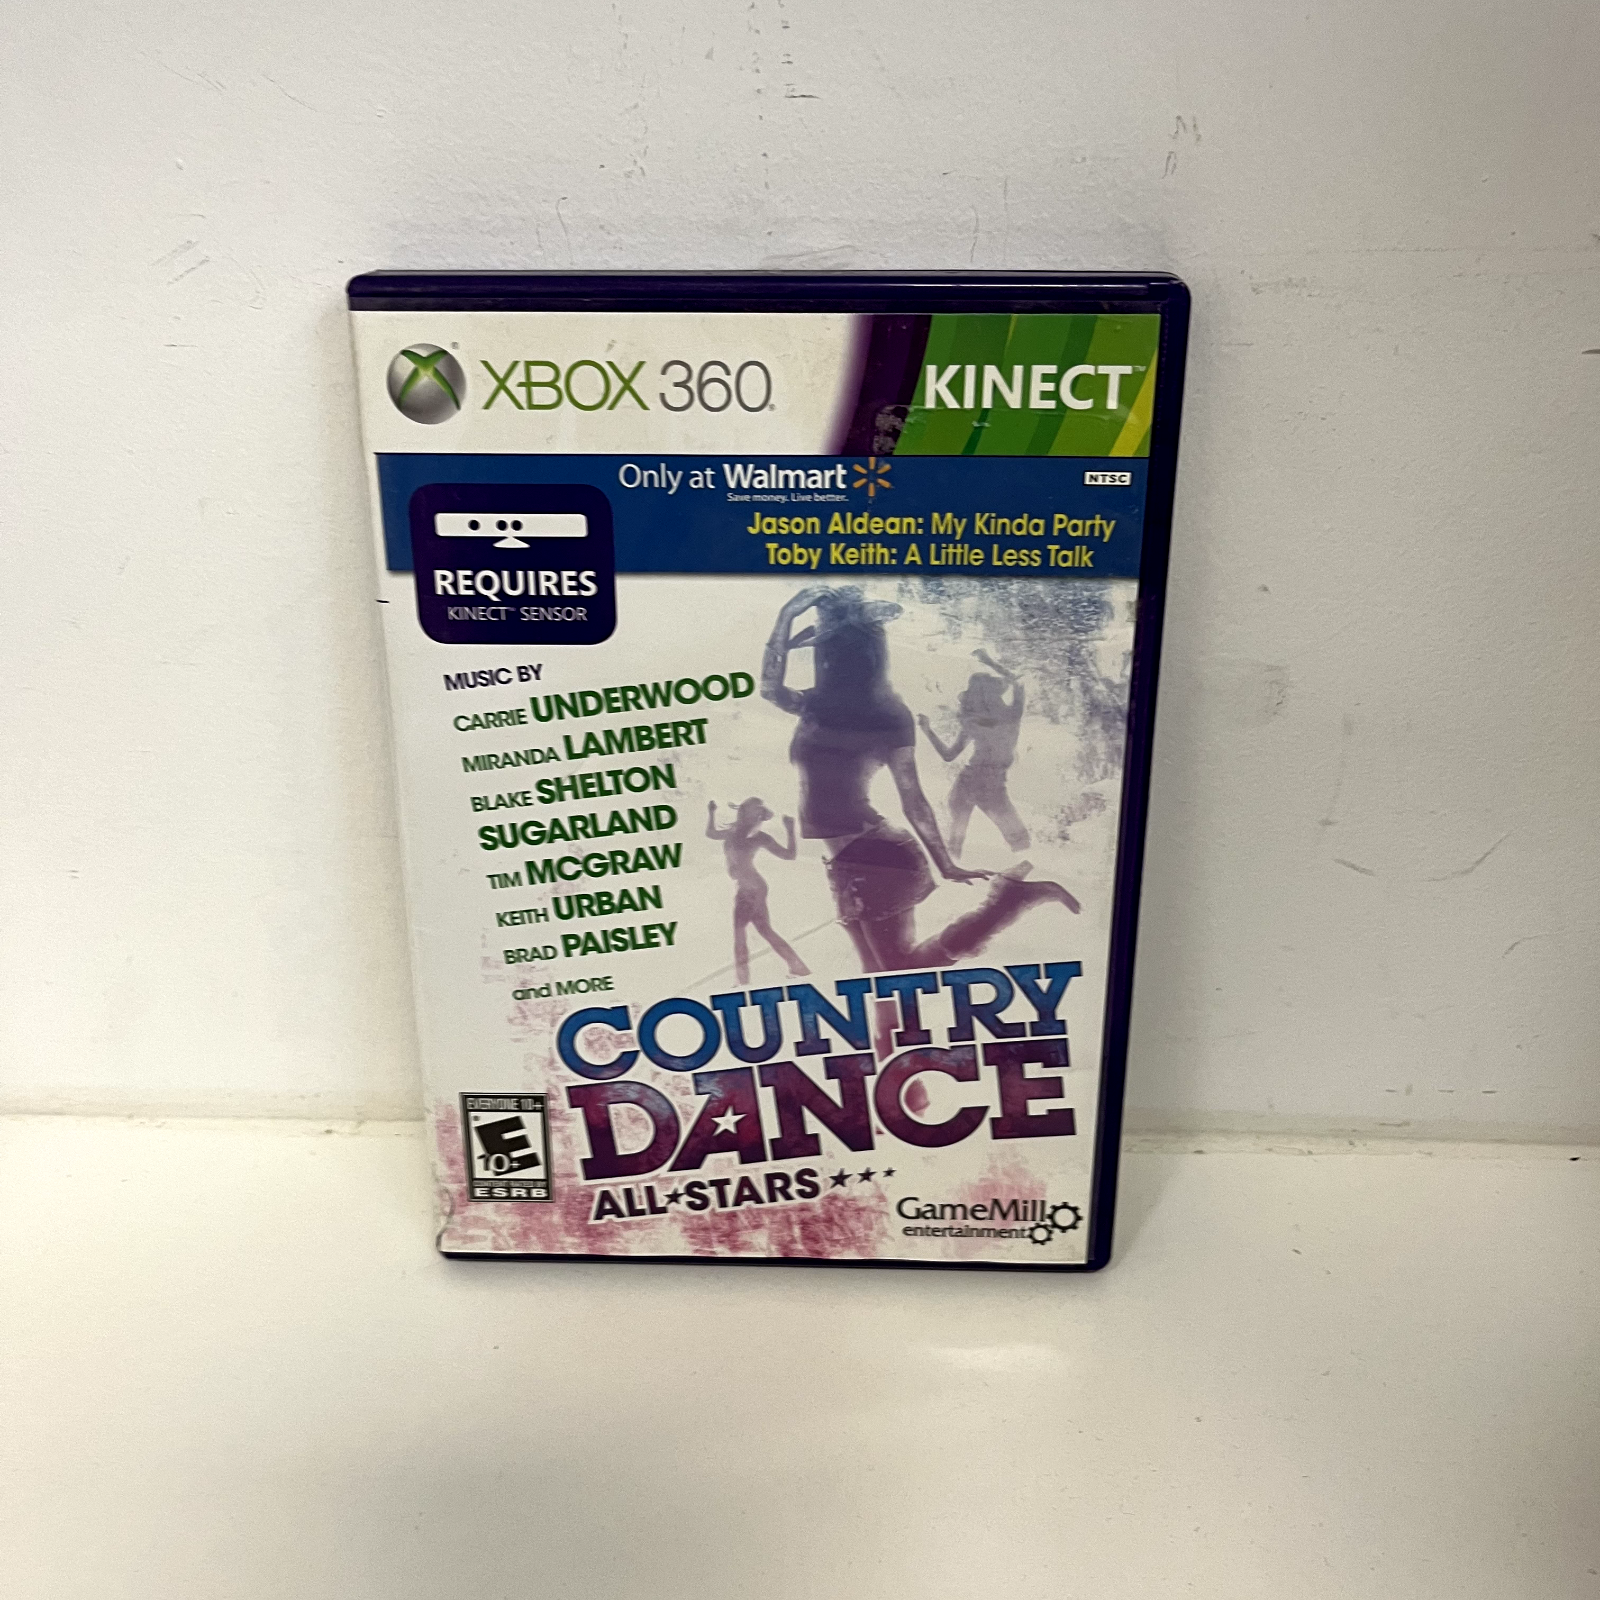 Xbox 360 Kinect Game Bundle Lot of 6 Games